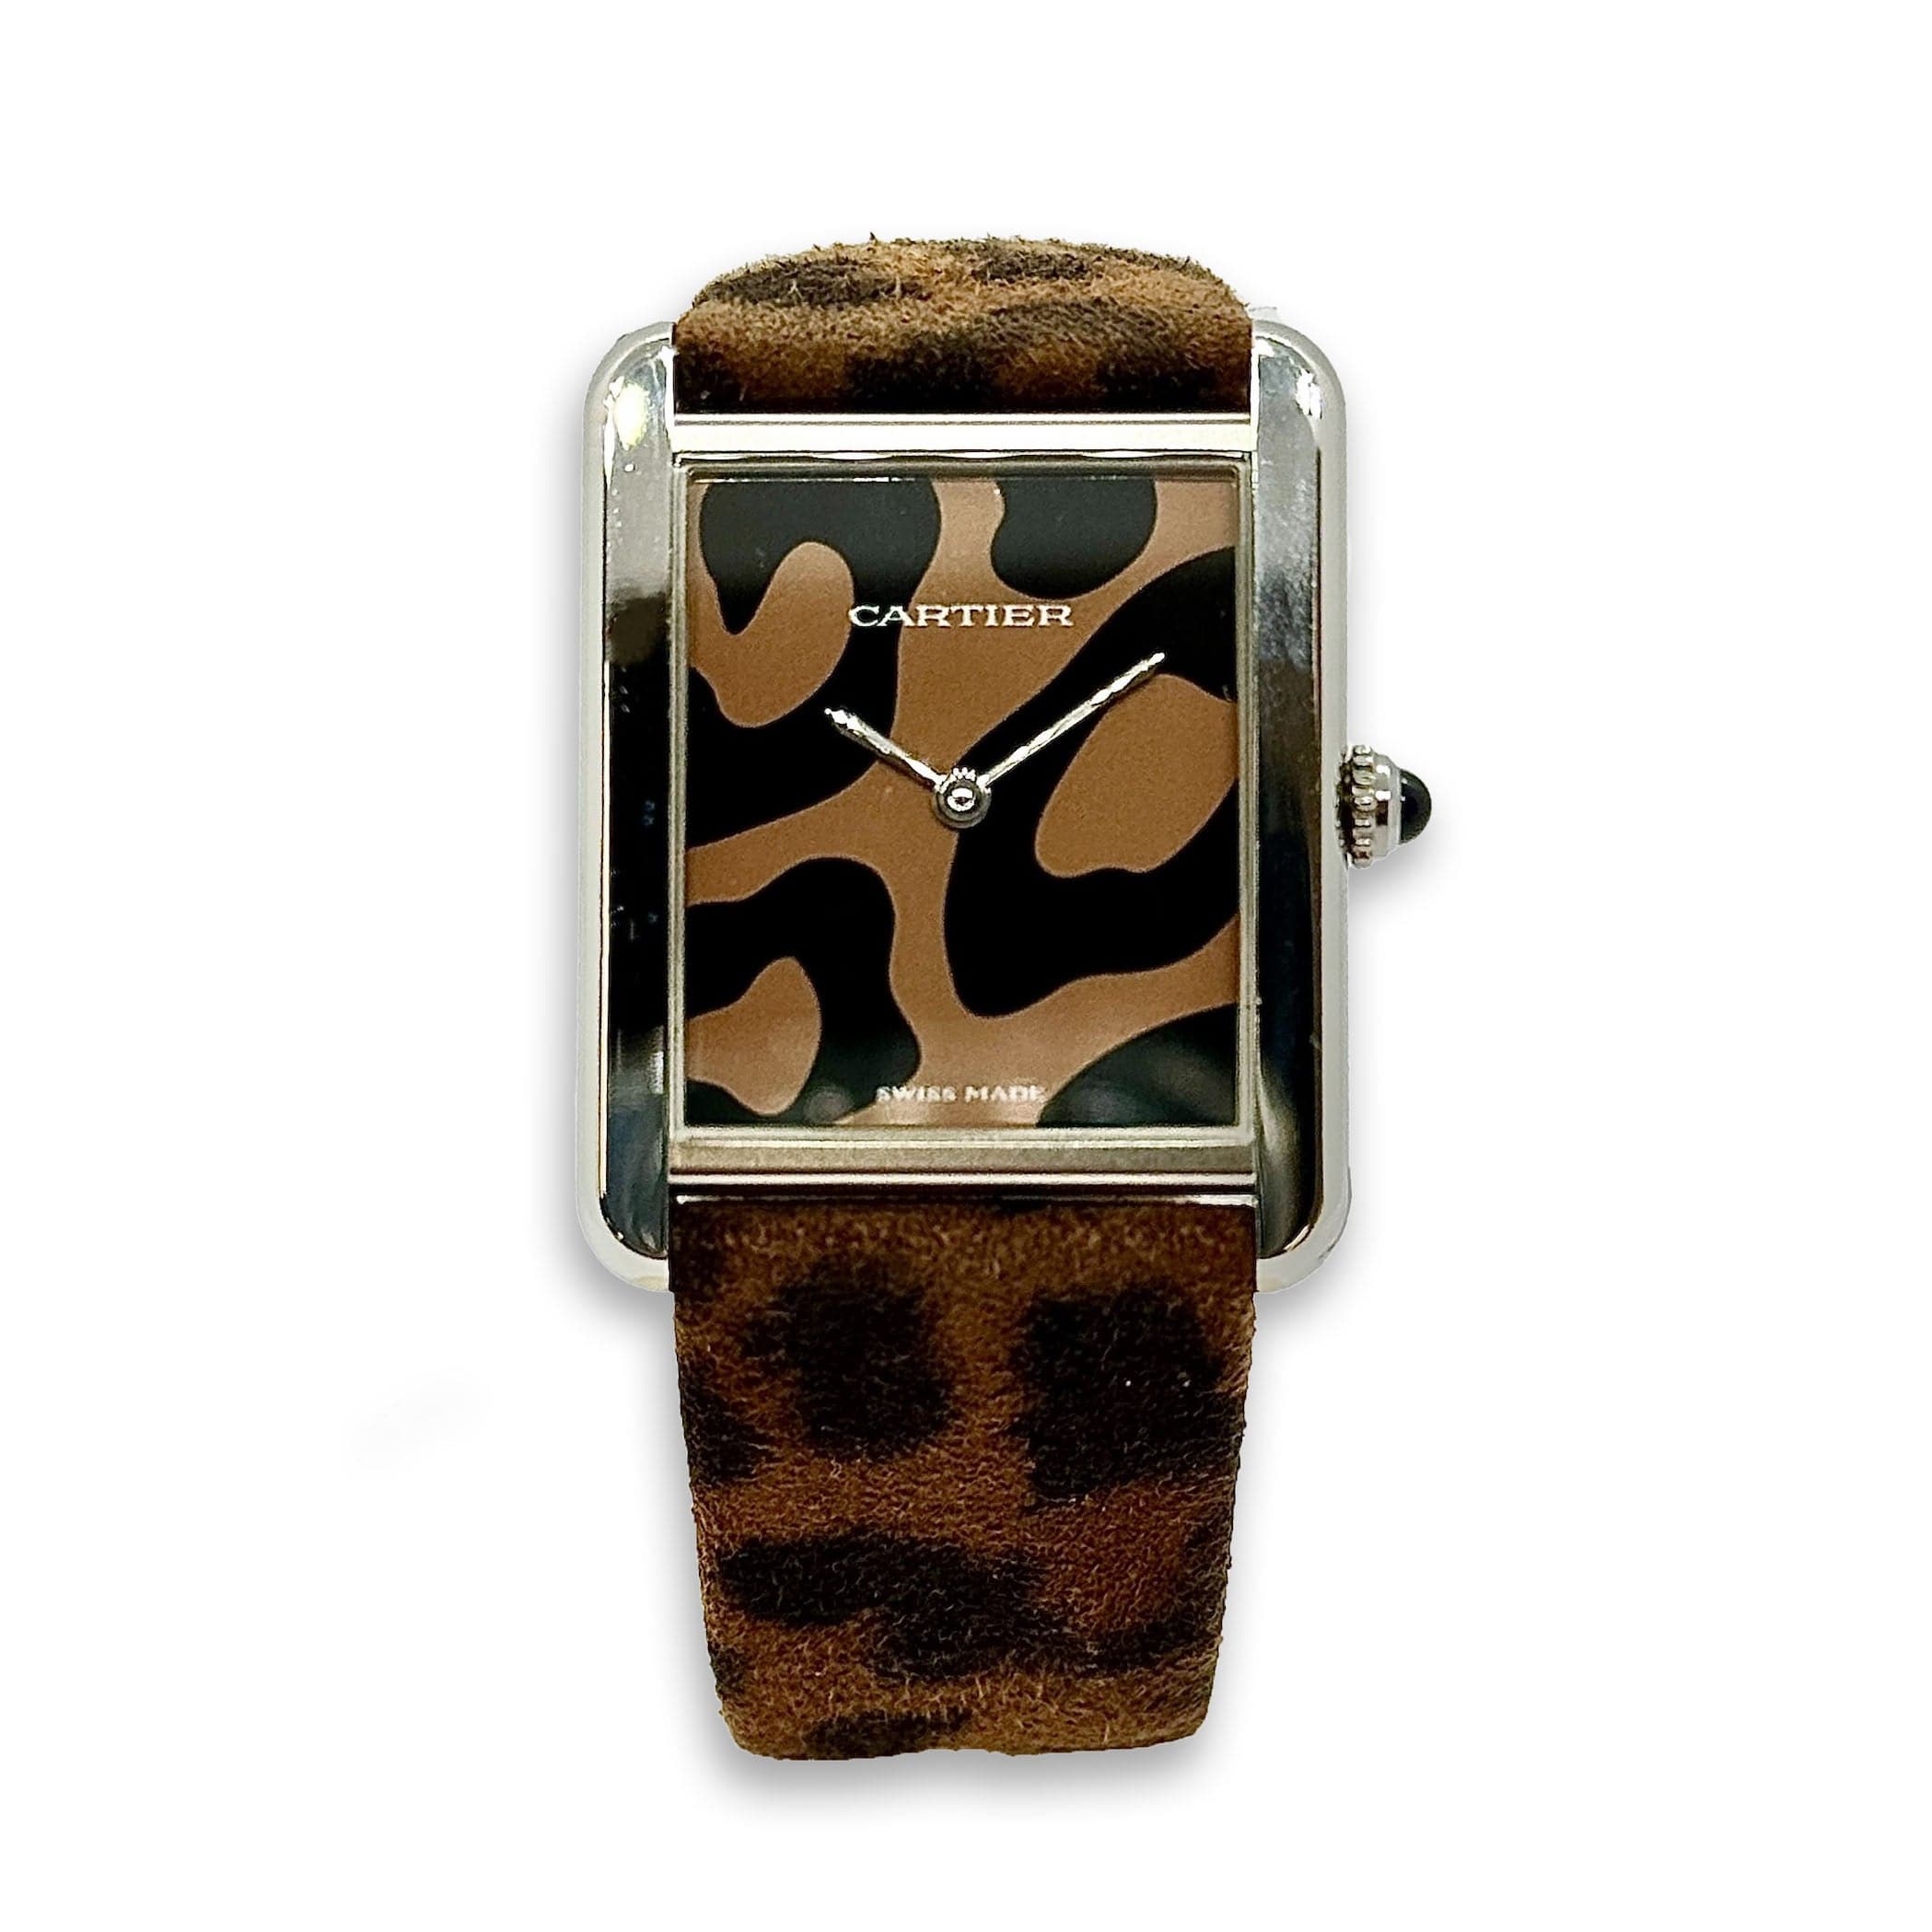 Pre-Owned Watch Watch Pre-owned Stainless-Steel Cartier Tank Leopard Animal Limited Edition